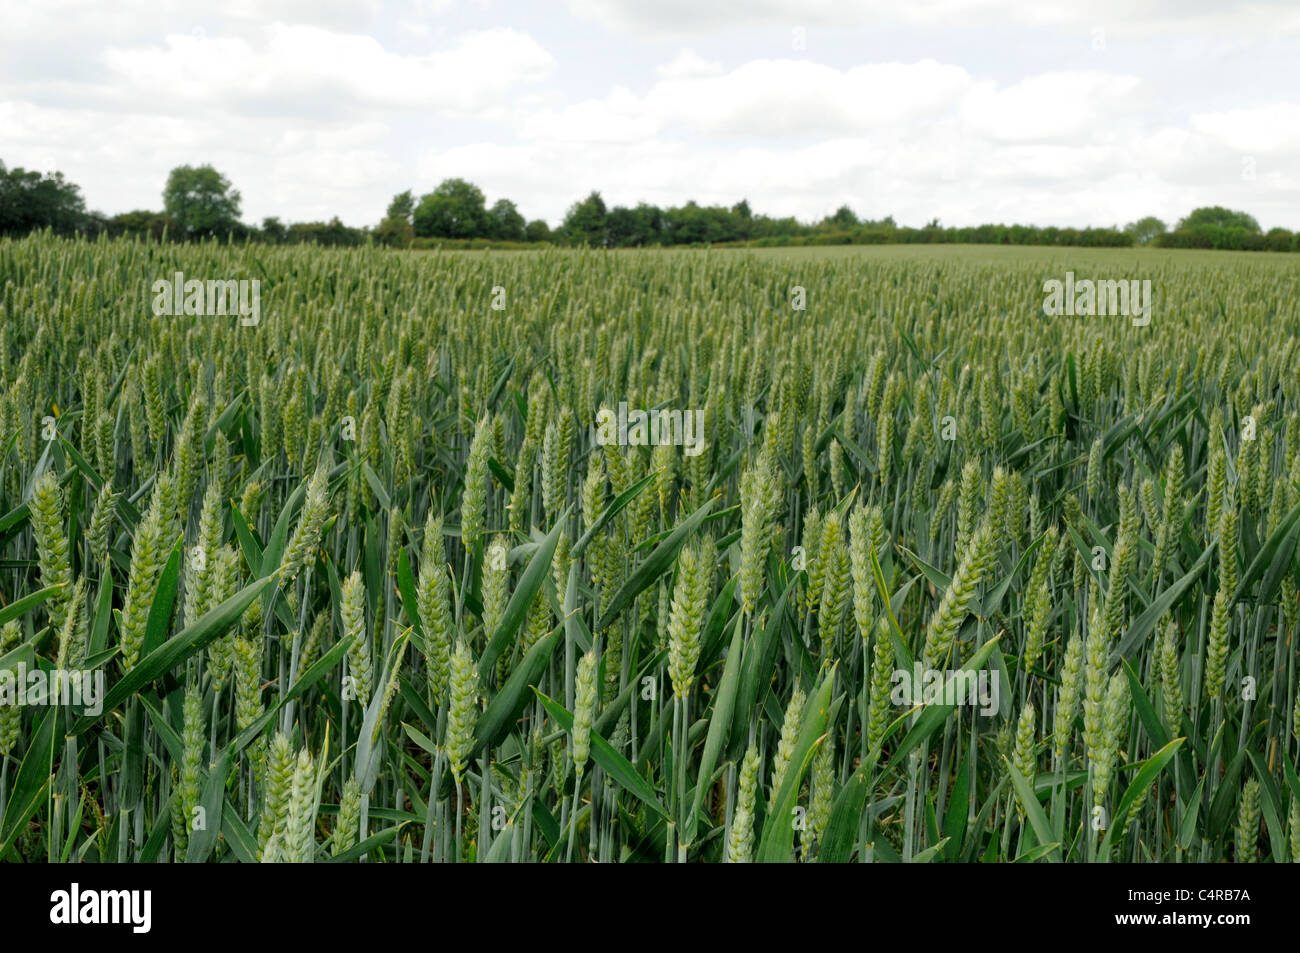 Green Corn Crop in Agricultural Farming Fields Stock Photo